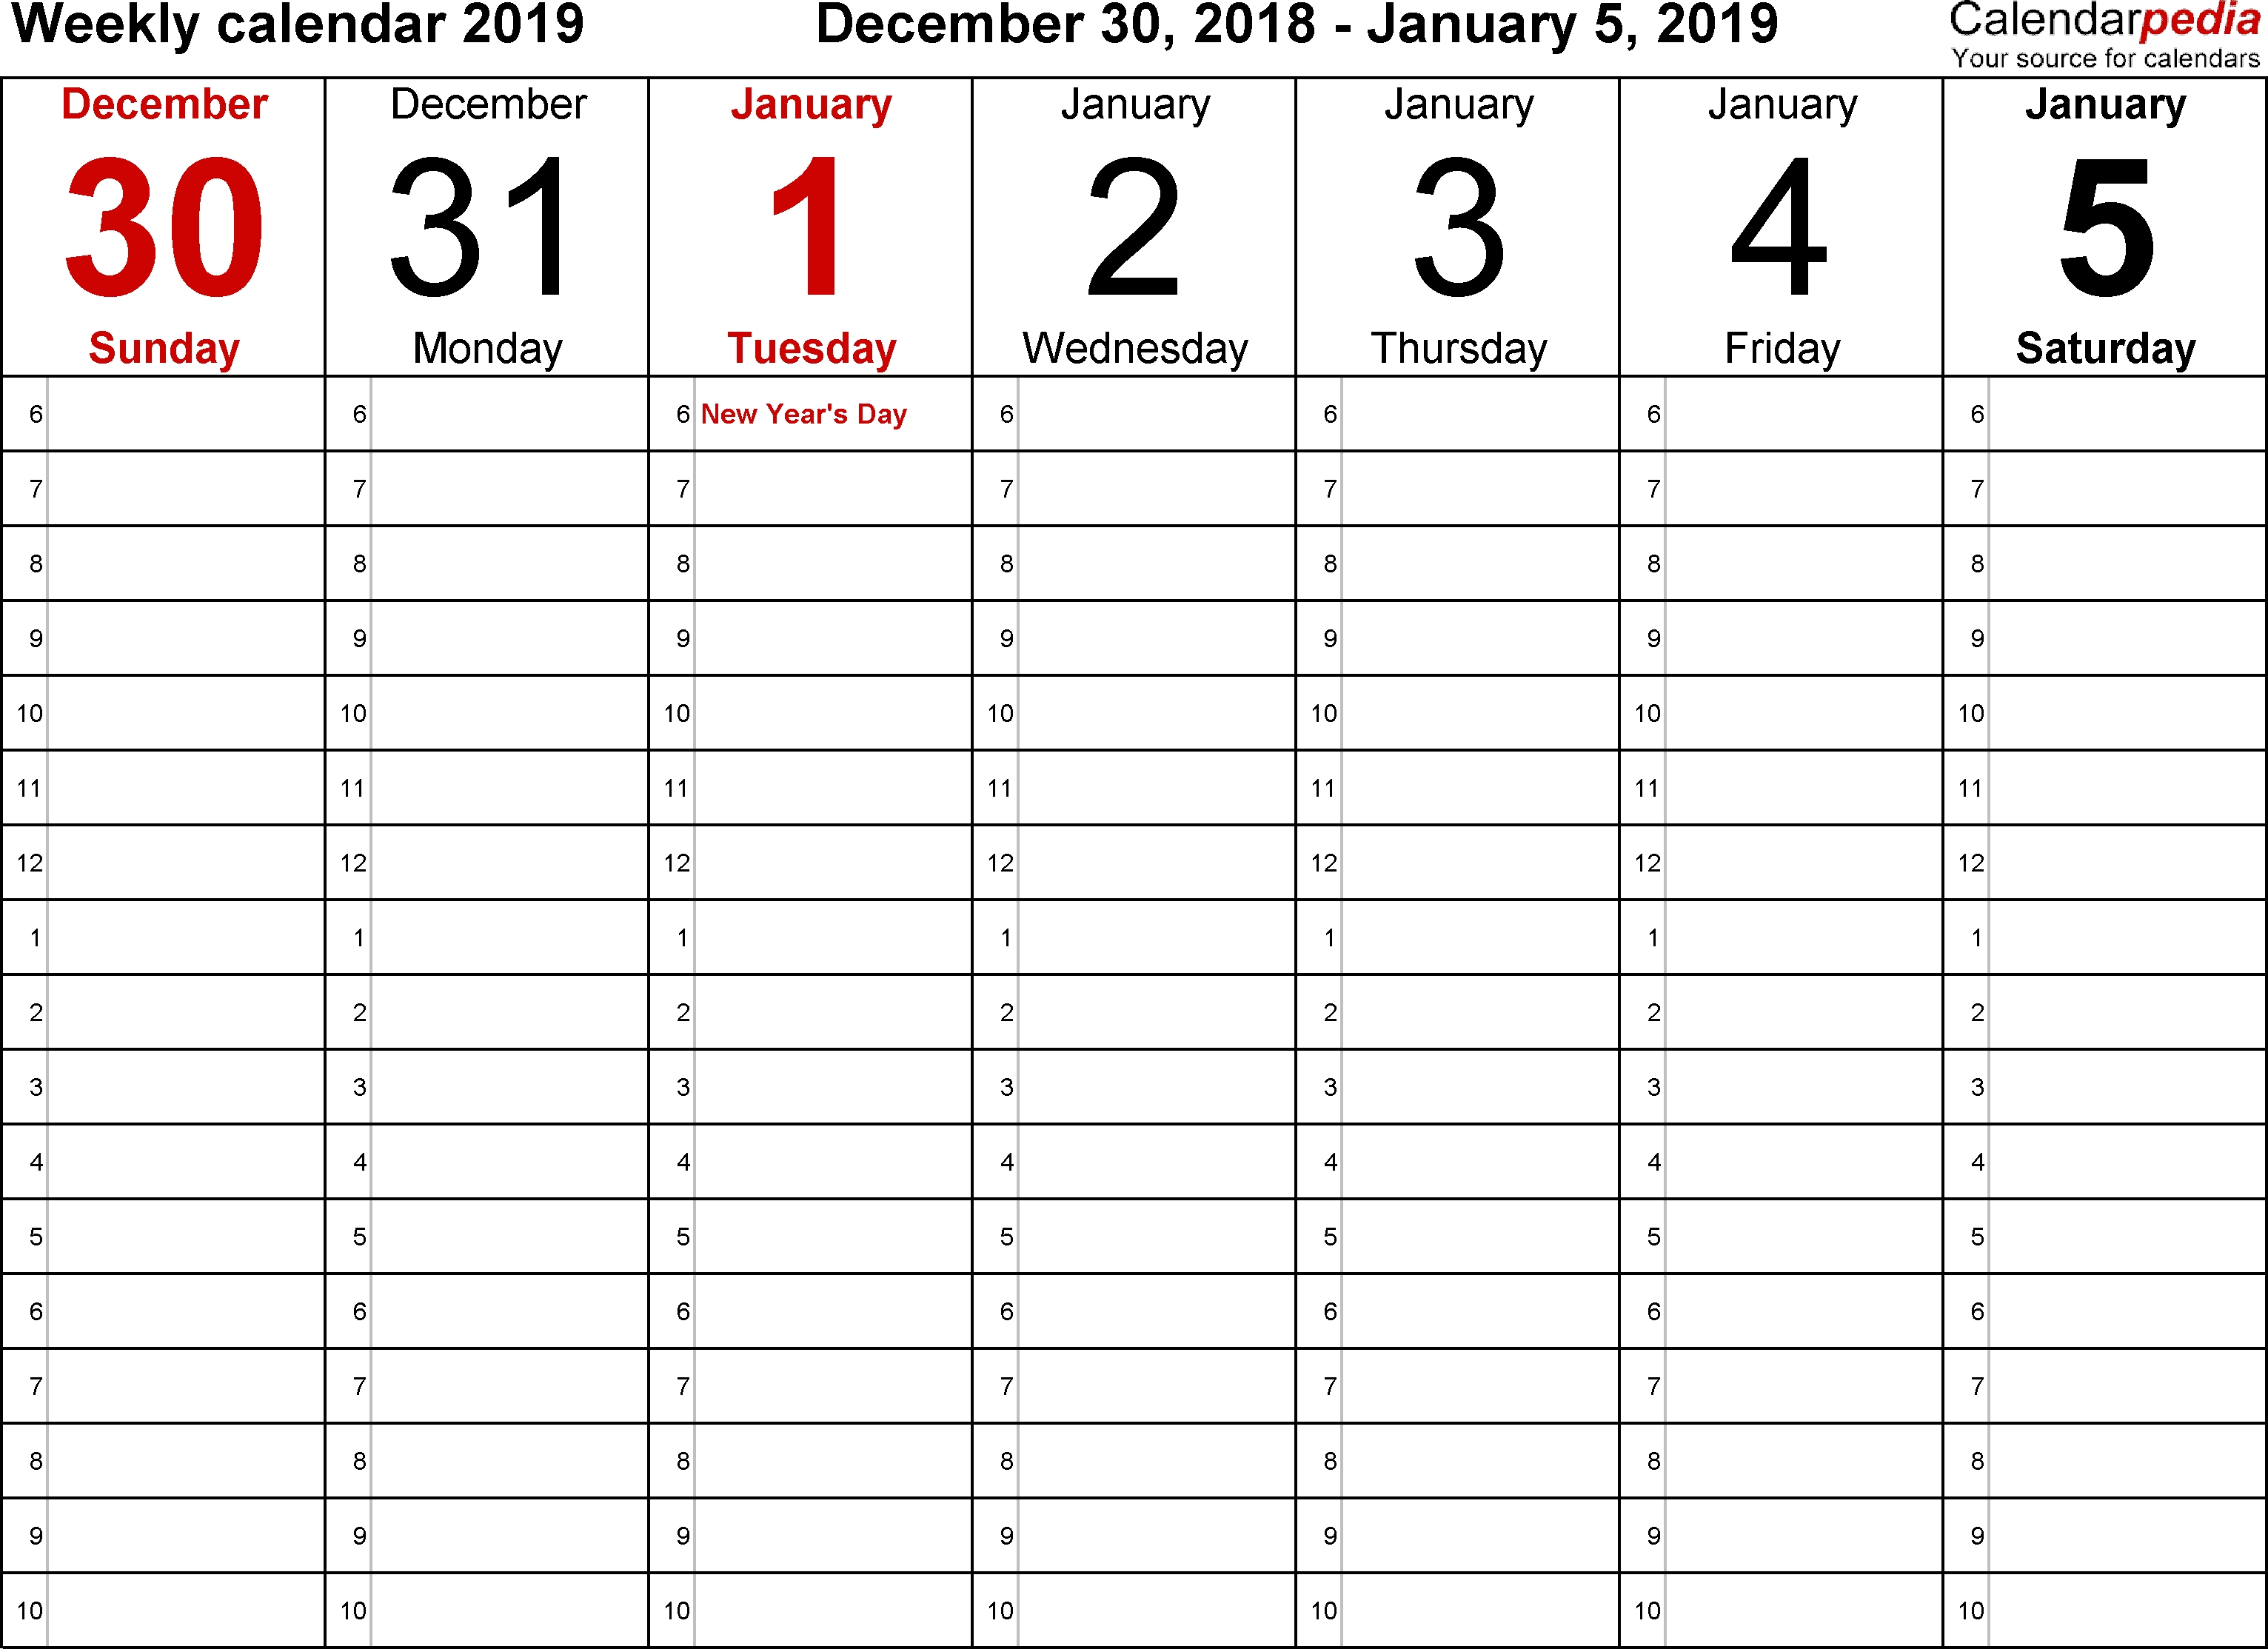 Weekly Calendar 2019 For Word - 12 Free Printable Templates pertaining to Blank Week Calender With Times